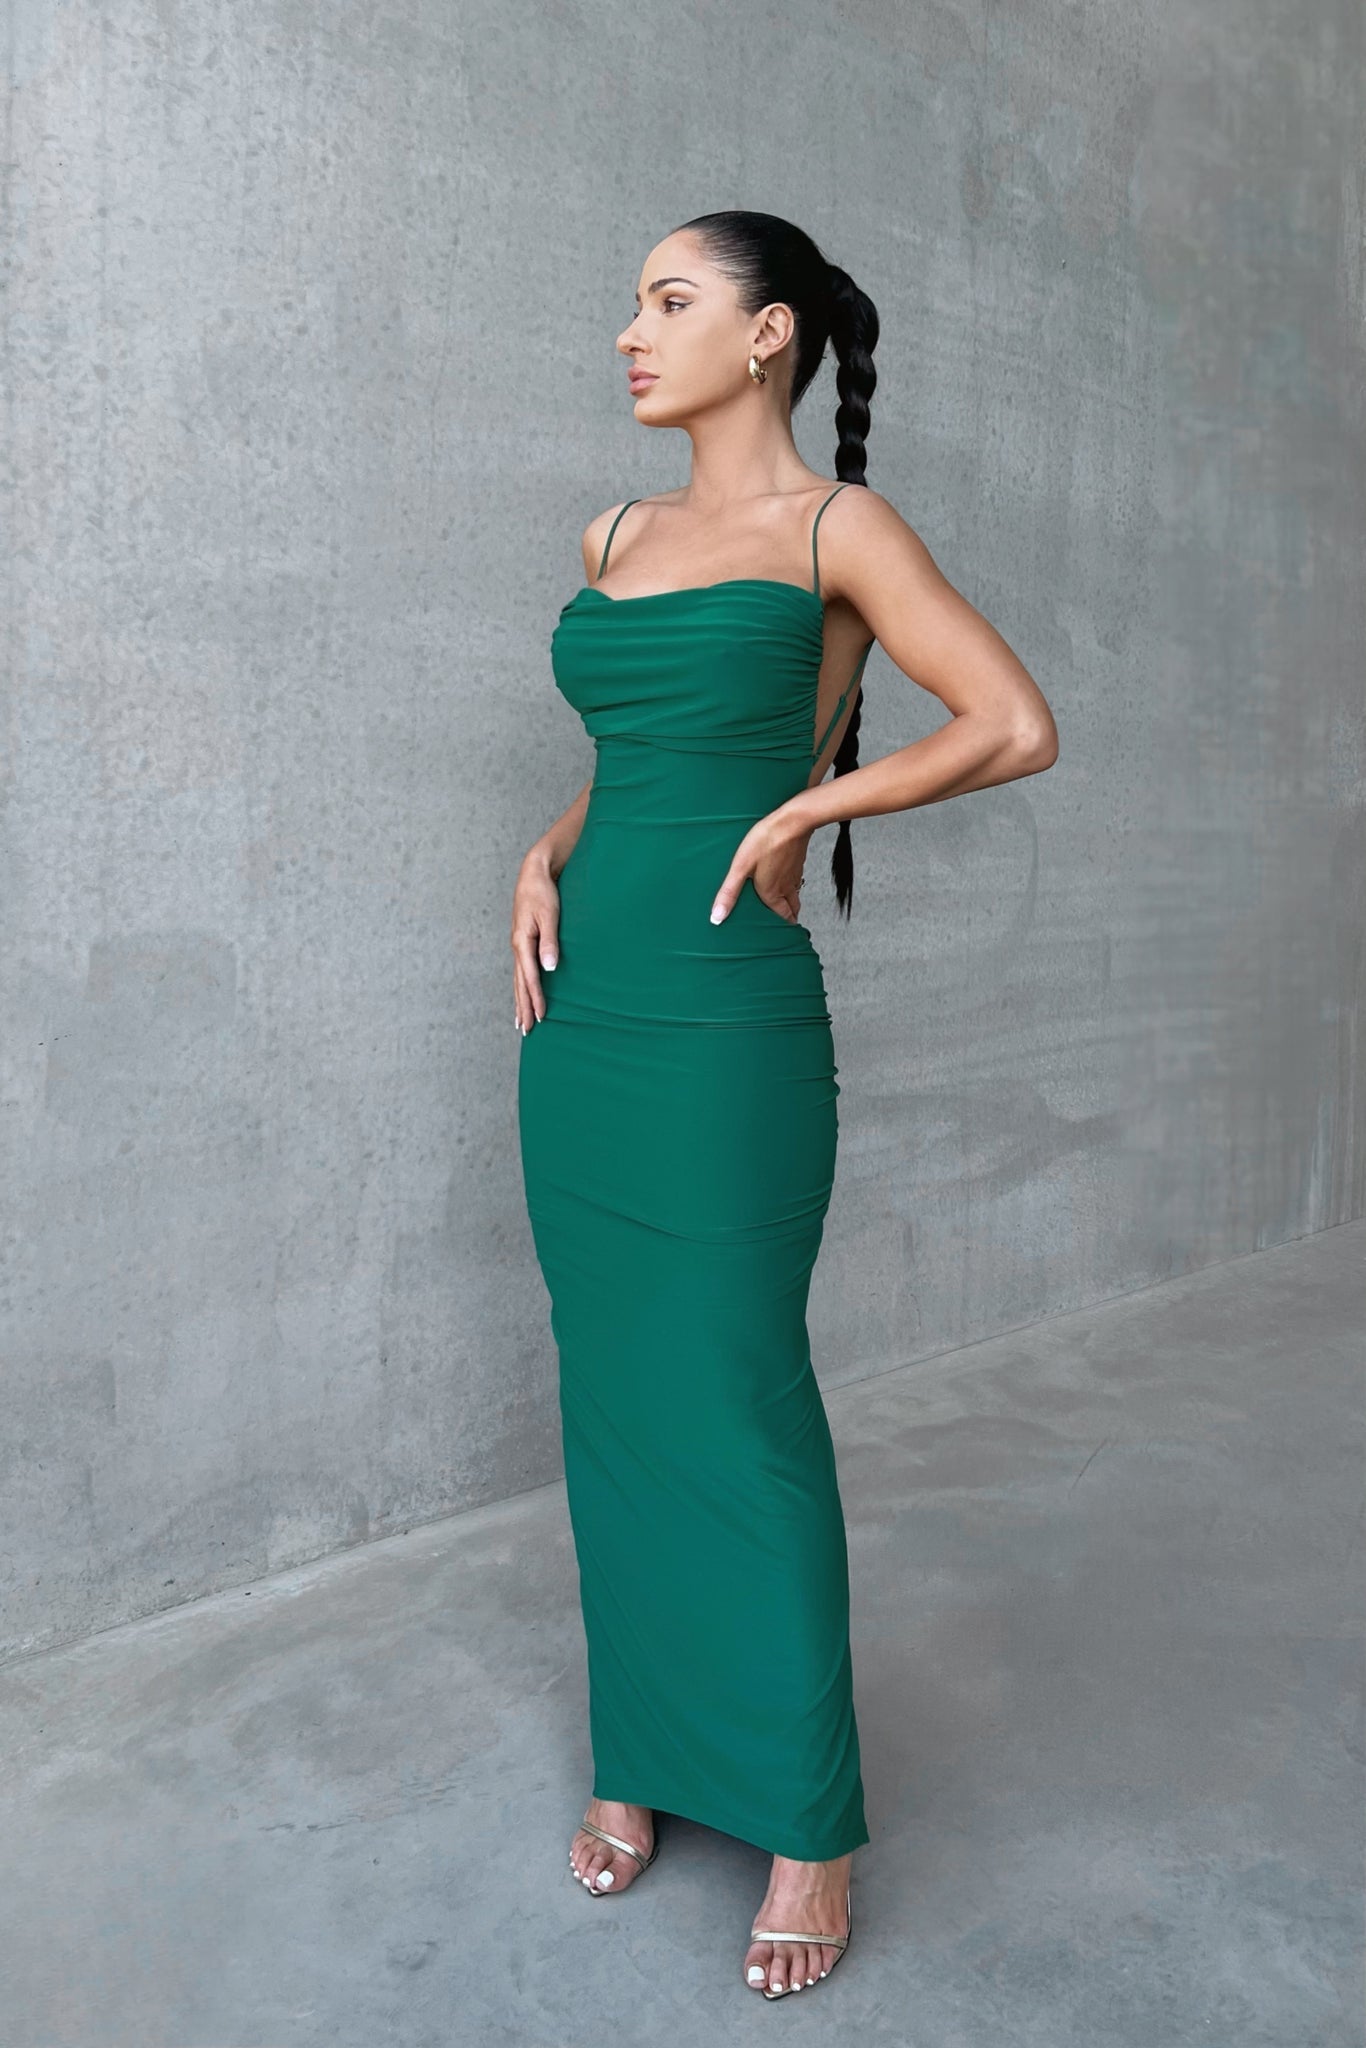 MÉLANI The Label CELINA Emerald Bum Ruched Backless Dress